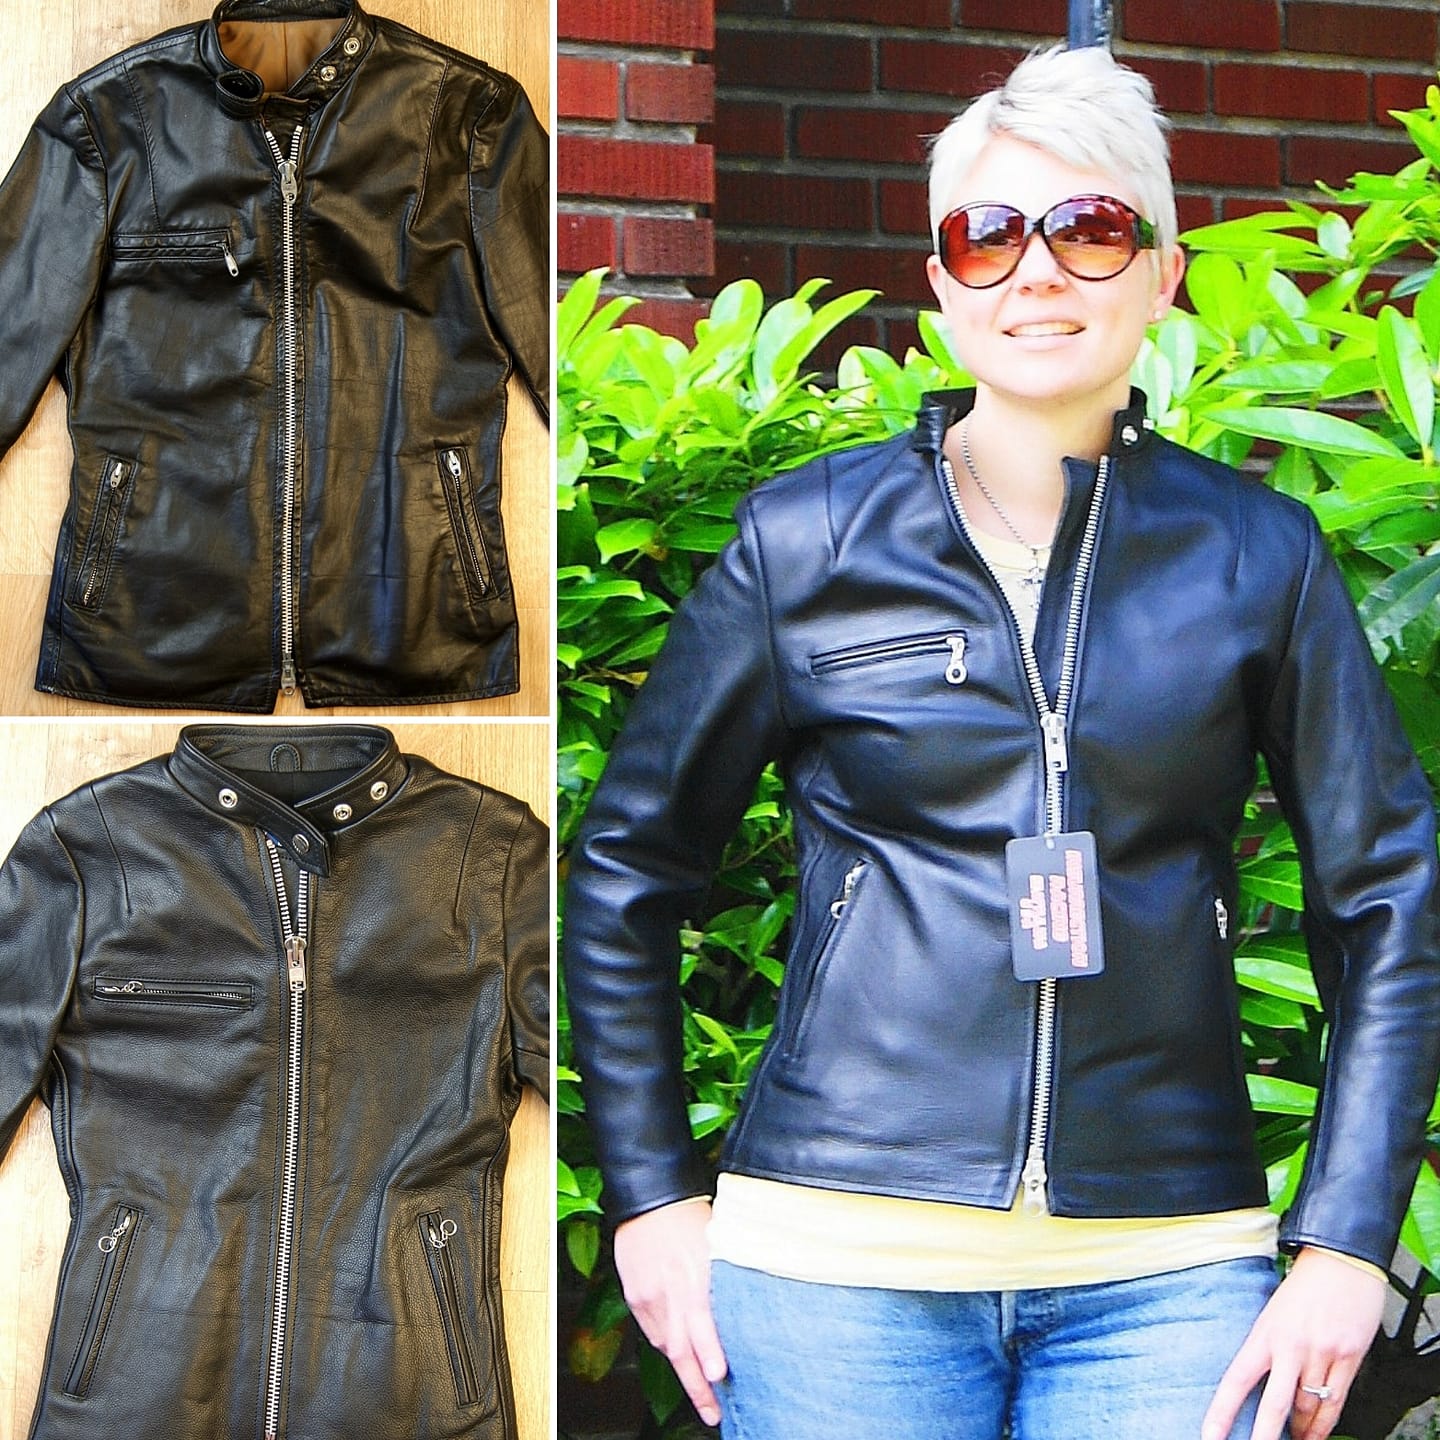 Women's jackets on Bargains page.jpg